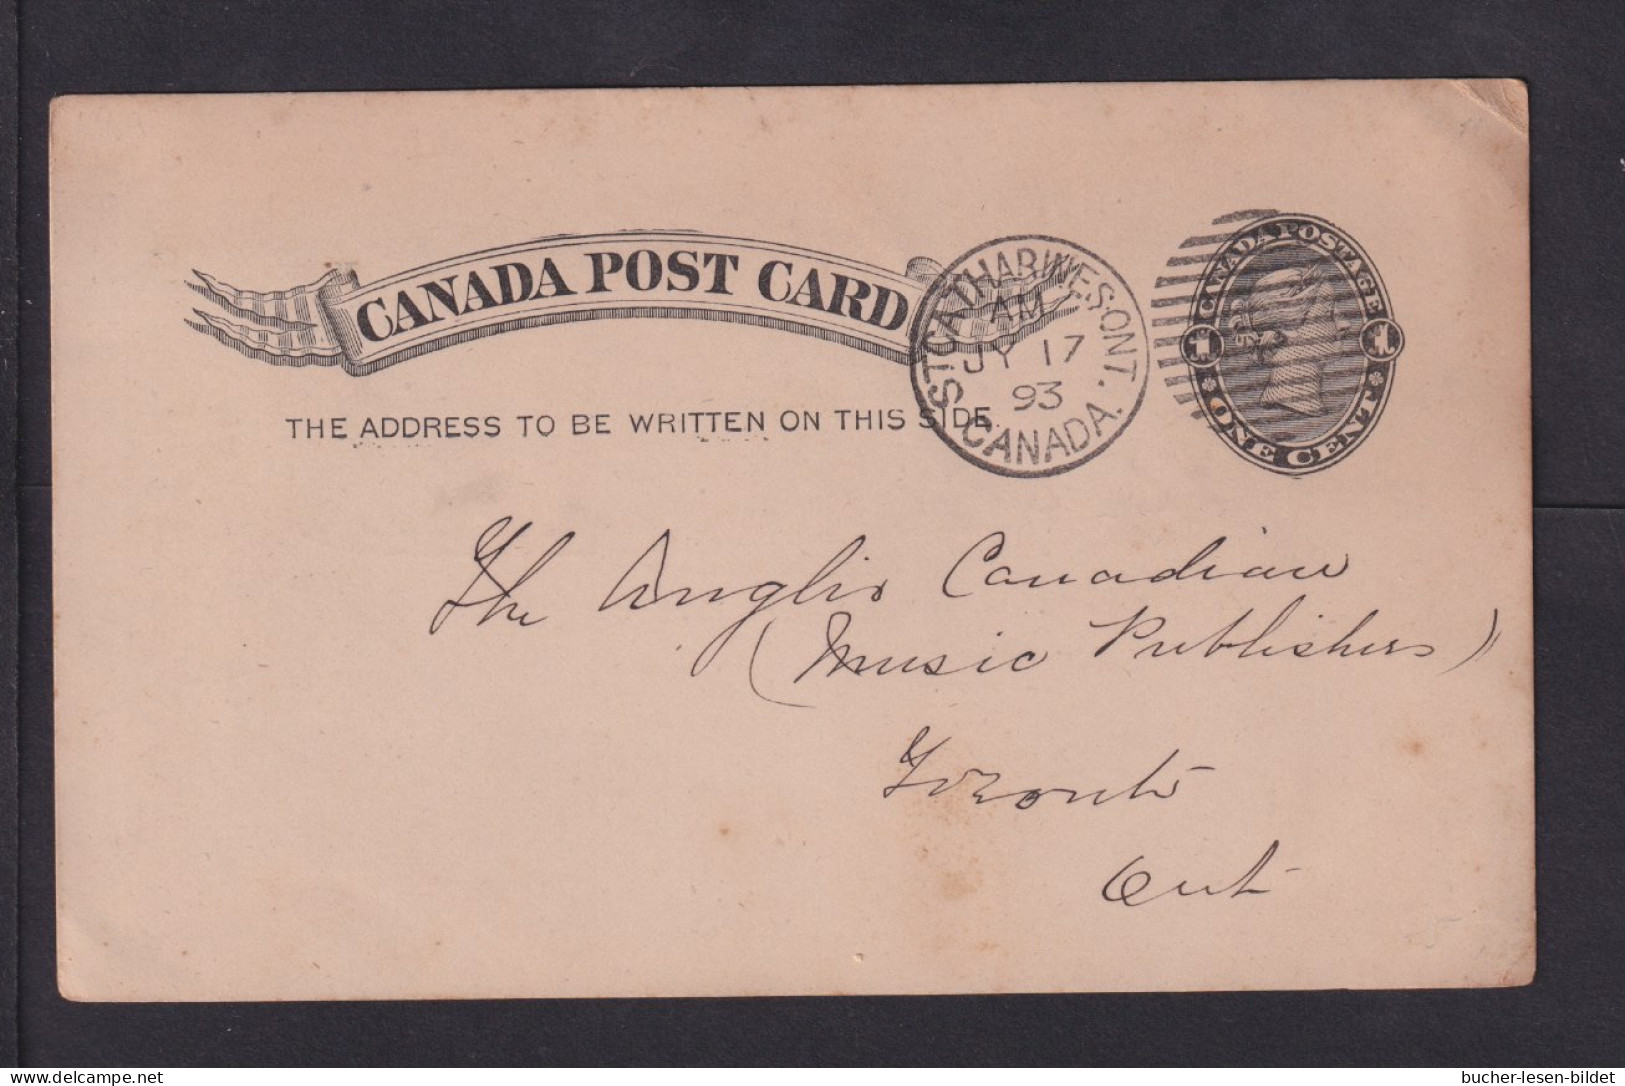 1893 - 1 C. Ganzsache Ab St. CATHARWEST Nach Toronto - Covers & Documents